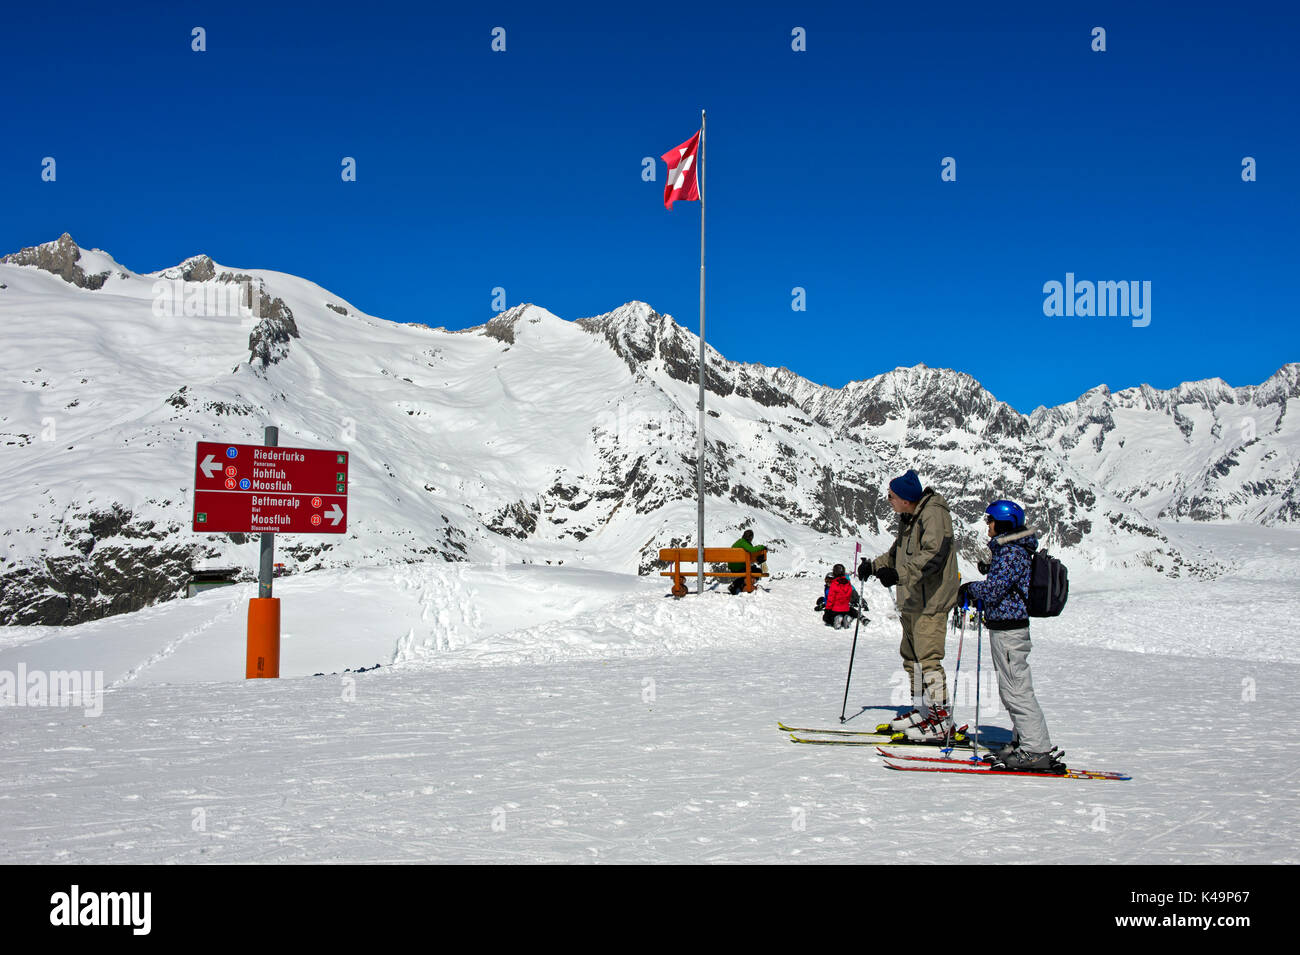 Skiers At The Viewpoint Moosfluh In The Aletsch Glacier Region, Riederalp, Valais, Switzerland Stock Photo